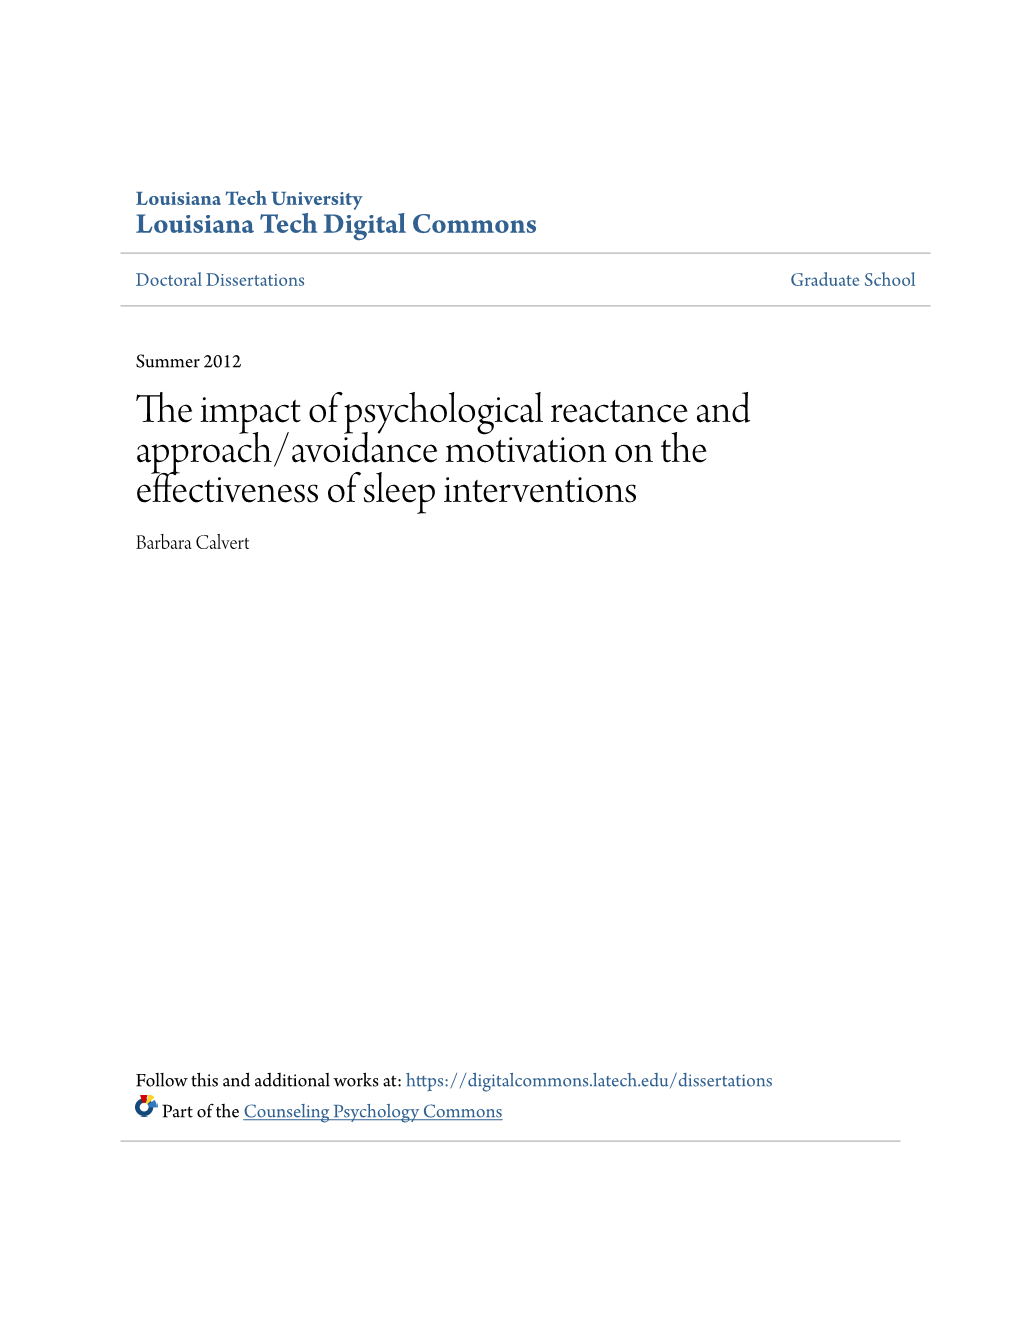 The Impact of Psychological Reactance and Approach/Avoidance Motivation on the Effectiveness of Sleep Interventions Barbara Calvert